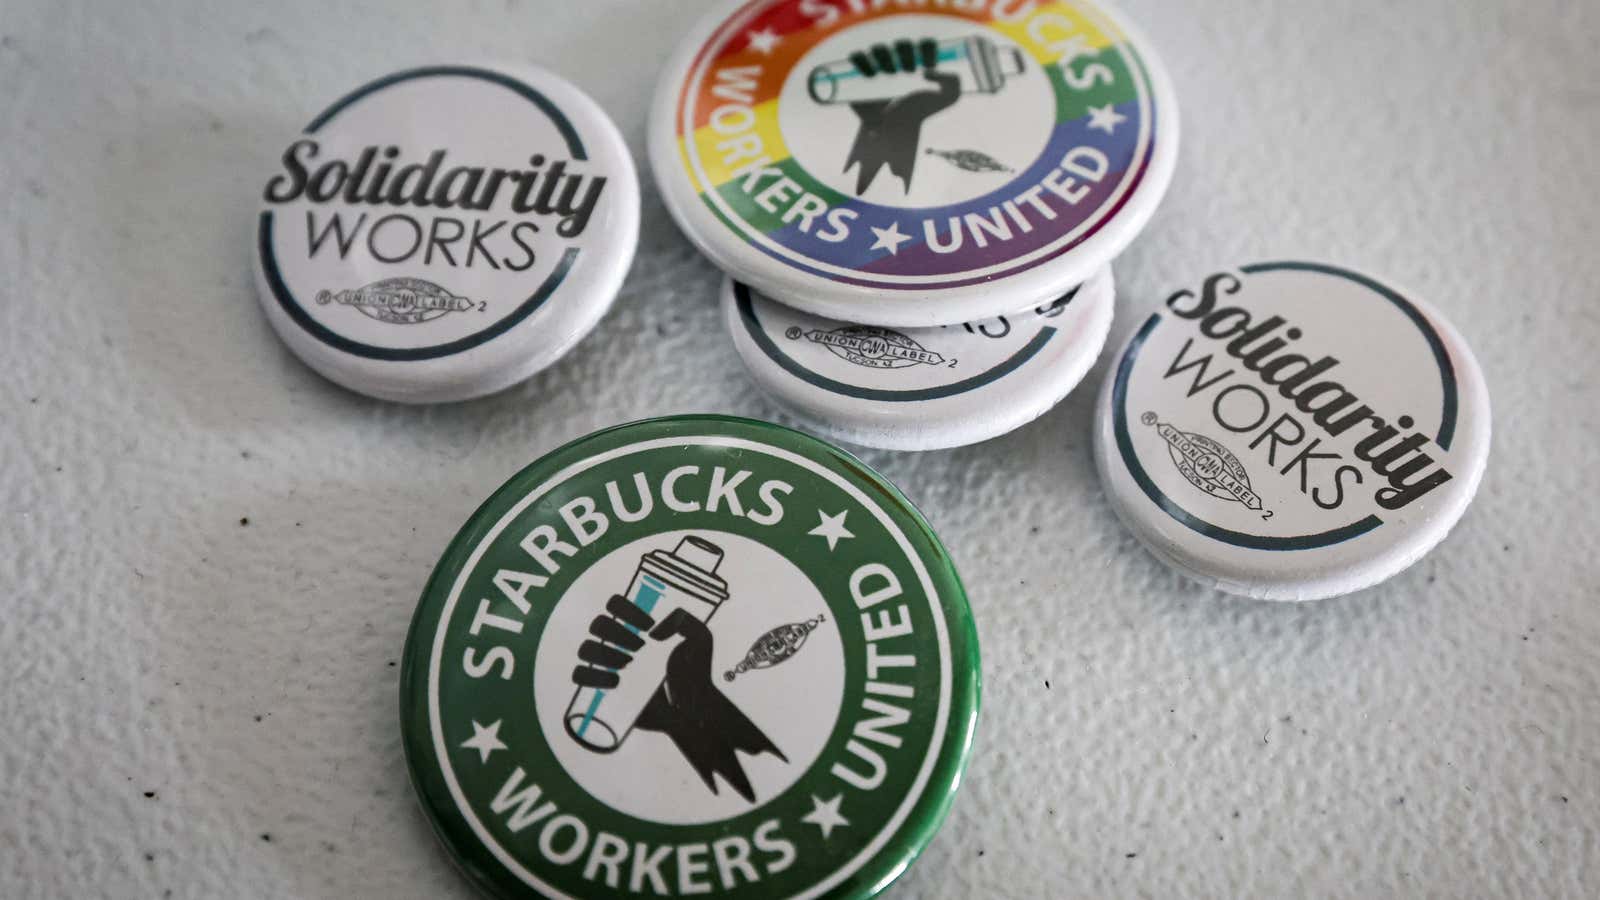 Starbucks wants to stop mail-in voting for union elections